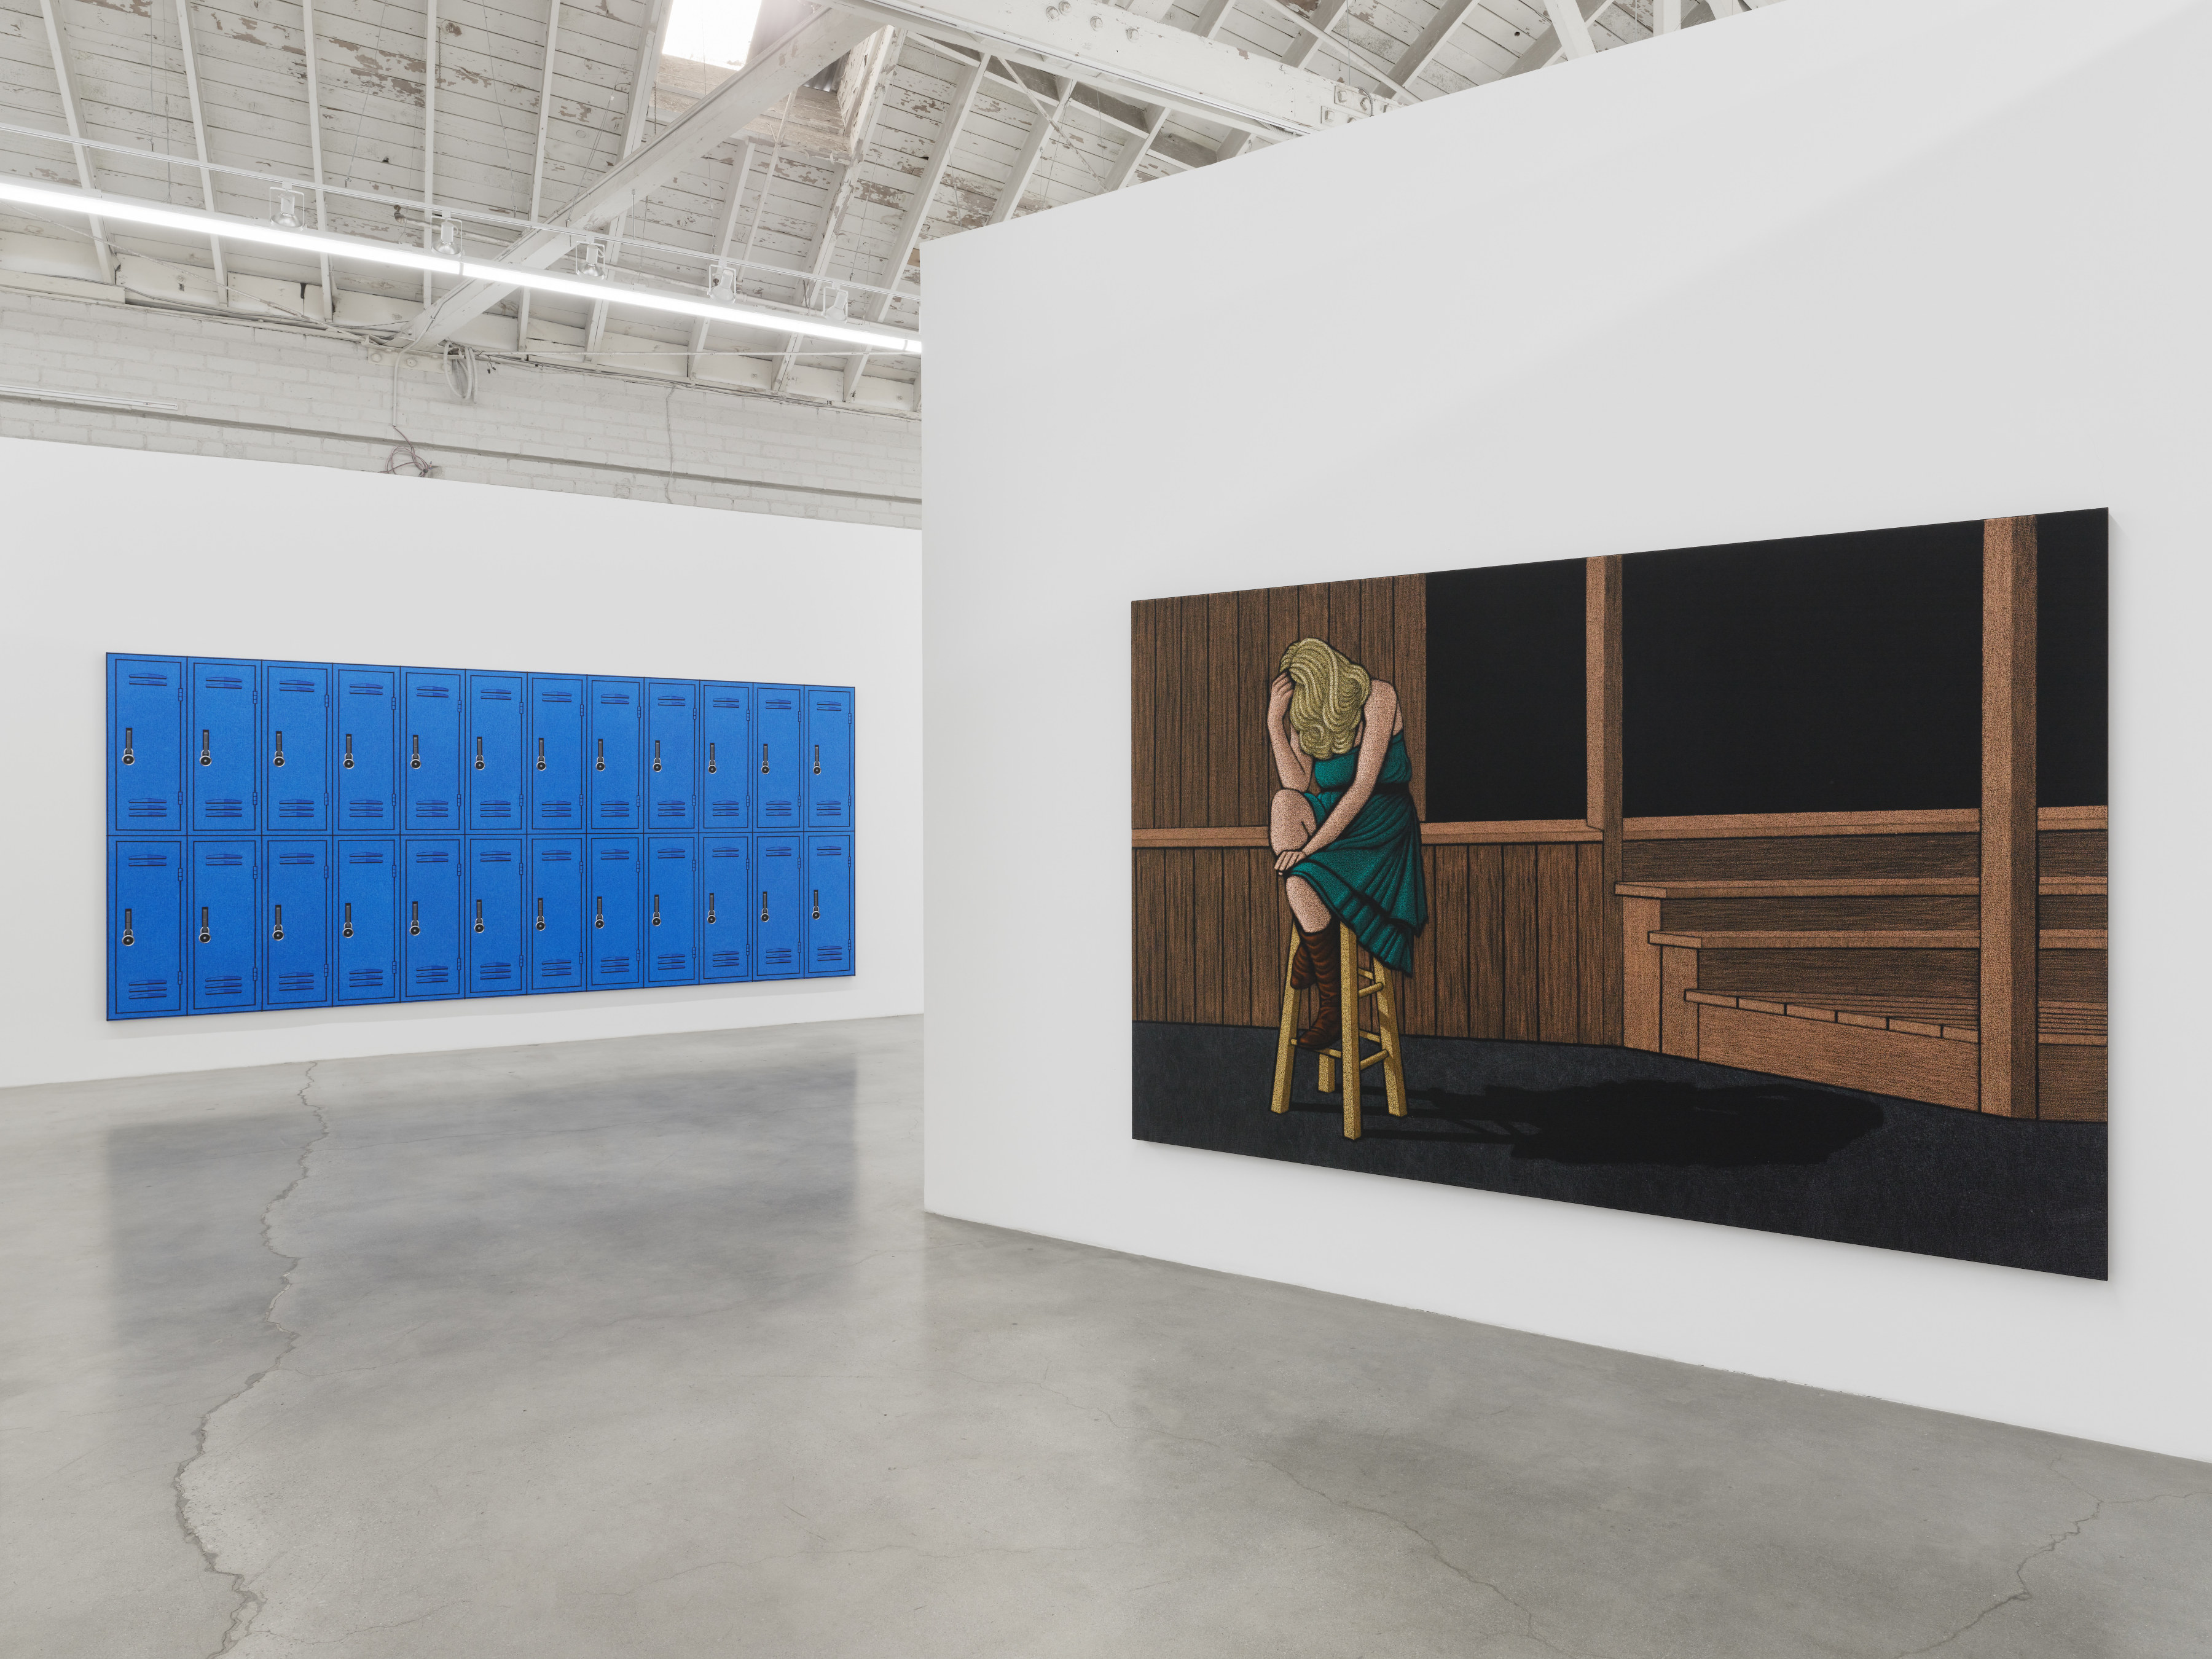 Installation view of Amy Adler's "Audition" at Night Gallery.